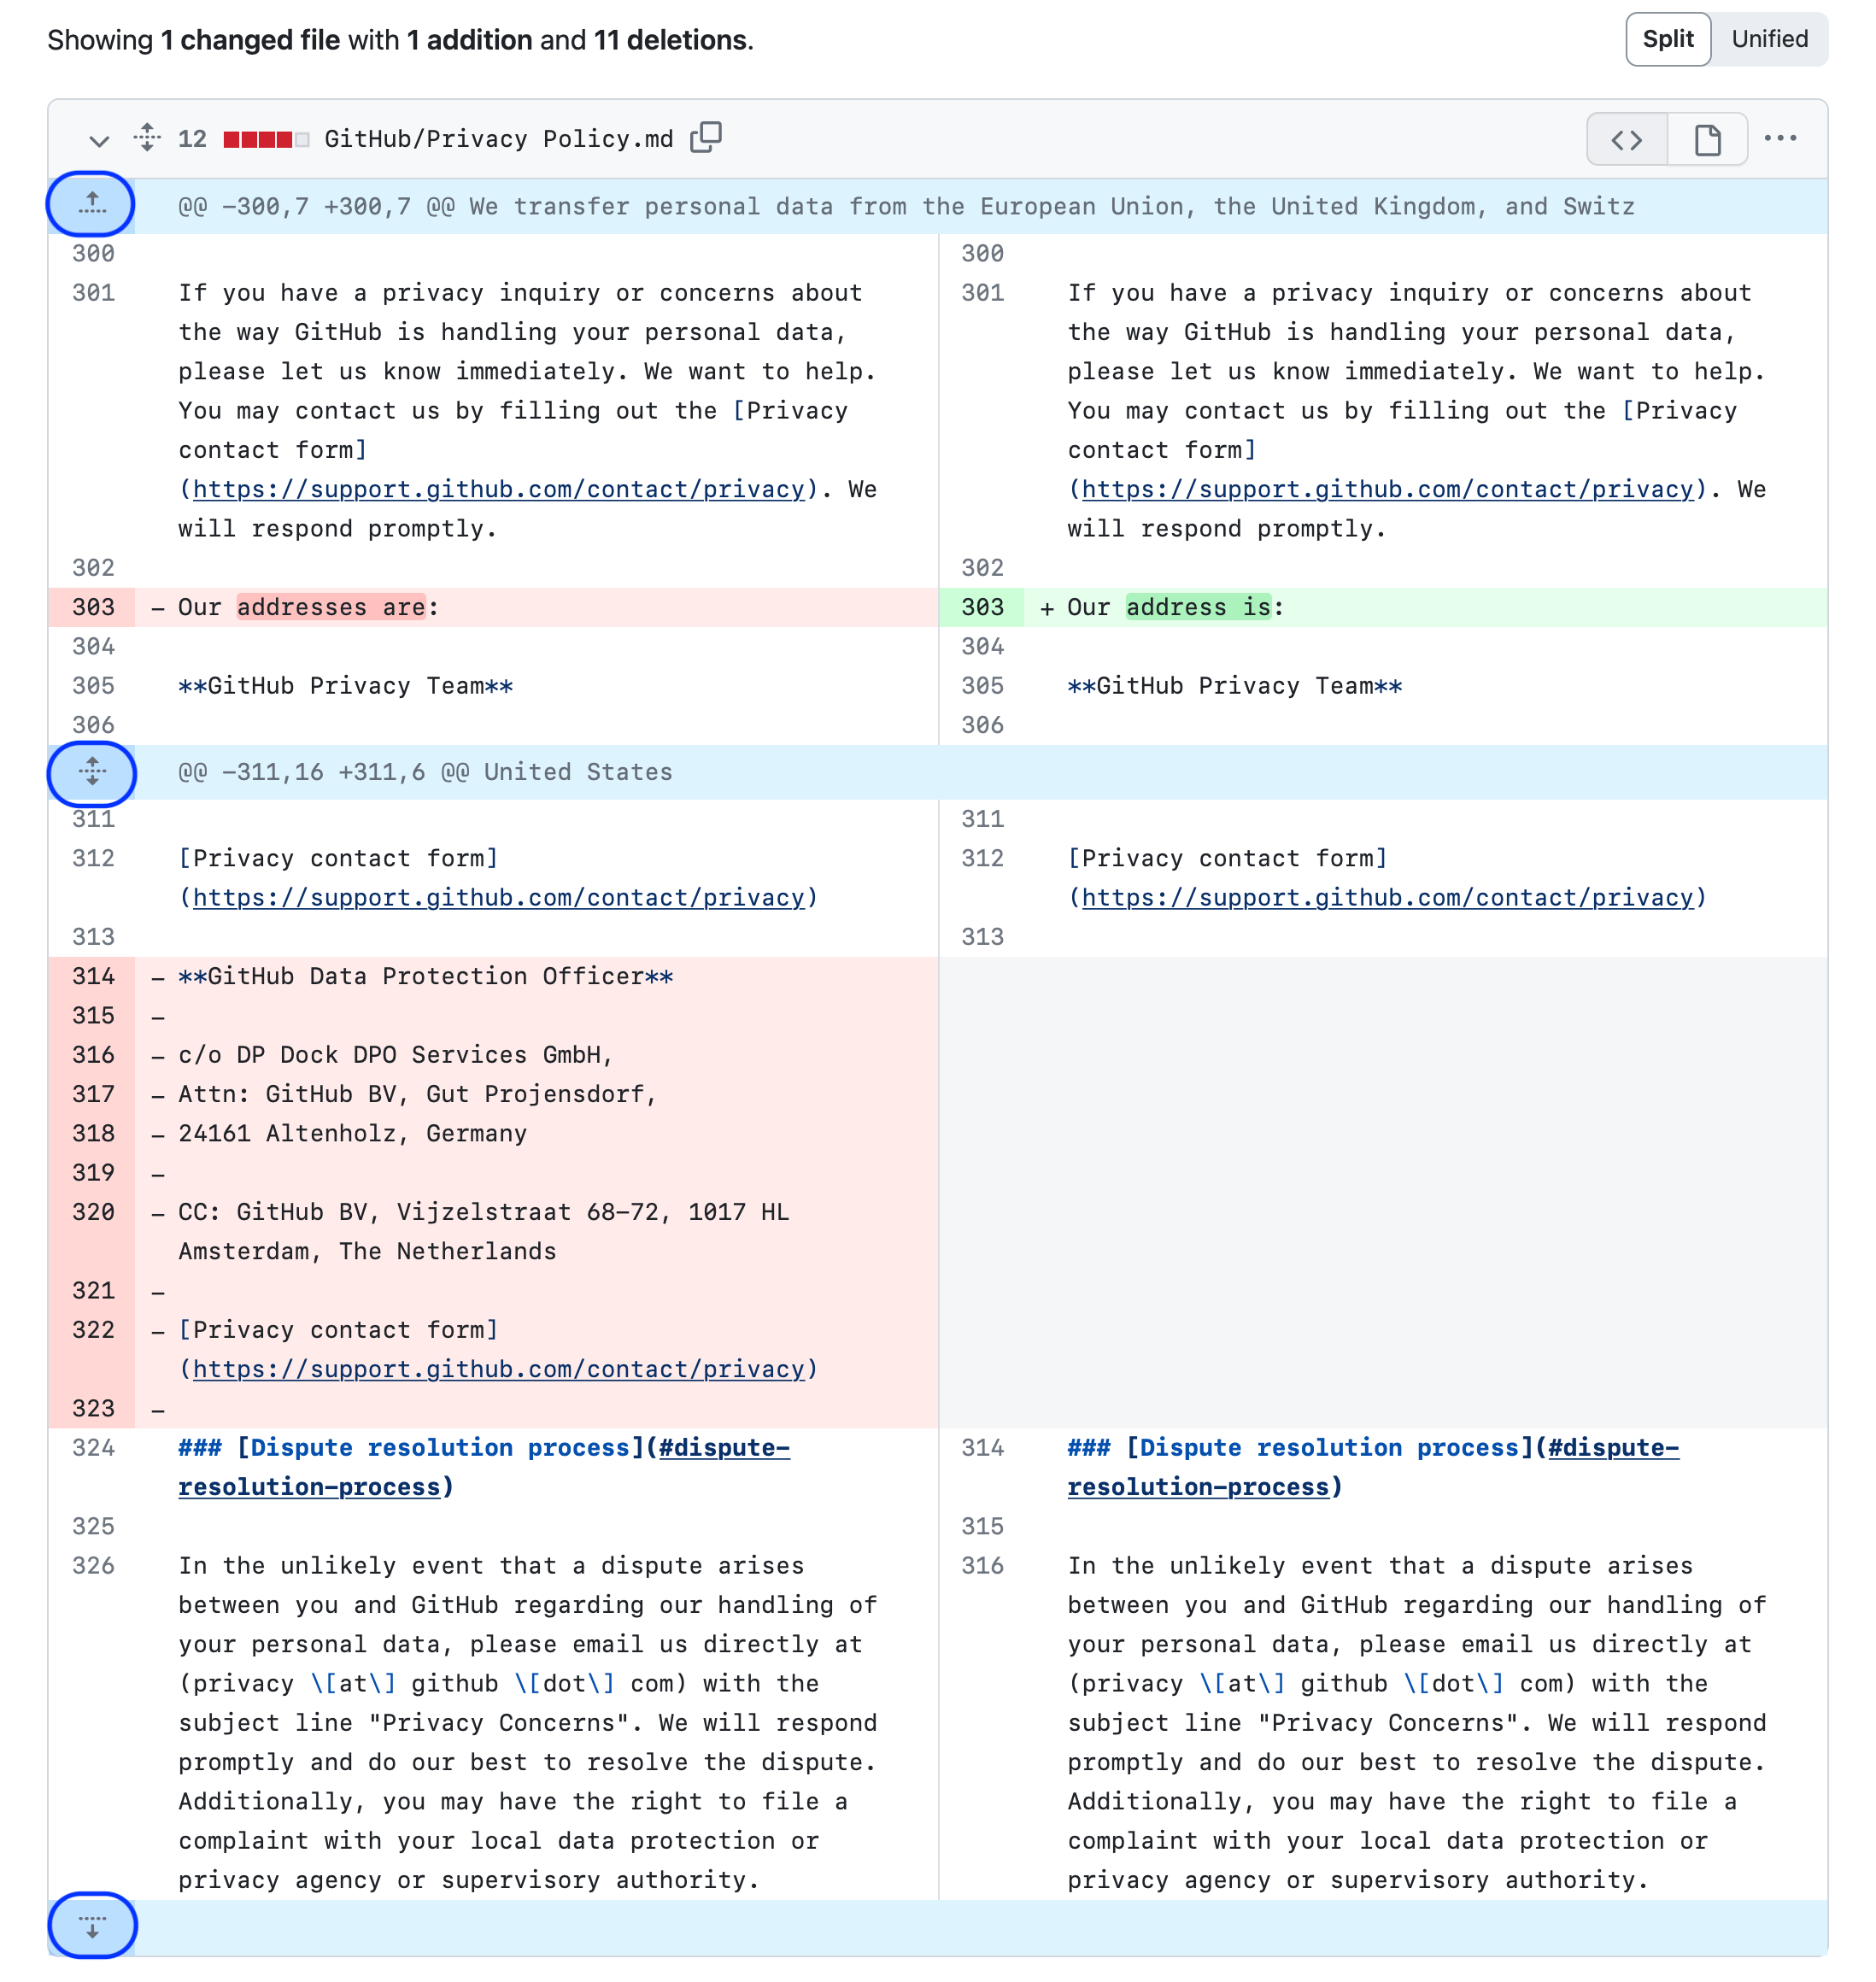 Expand unchanged paragraphs on source diff view